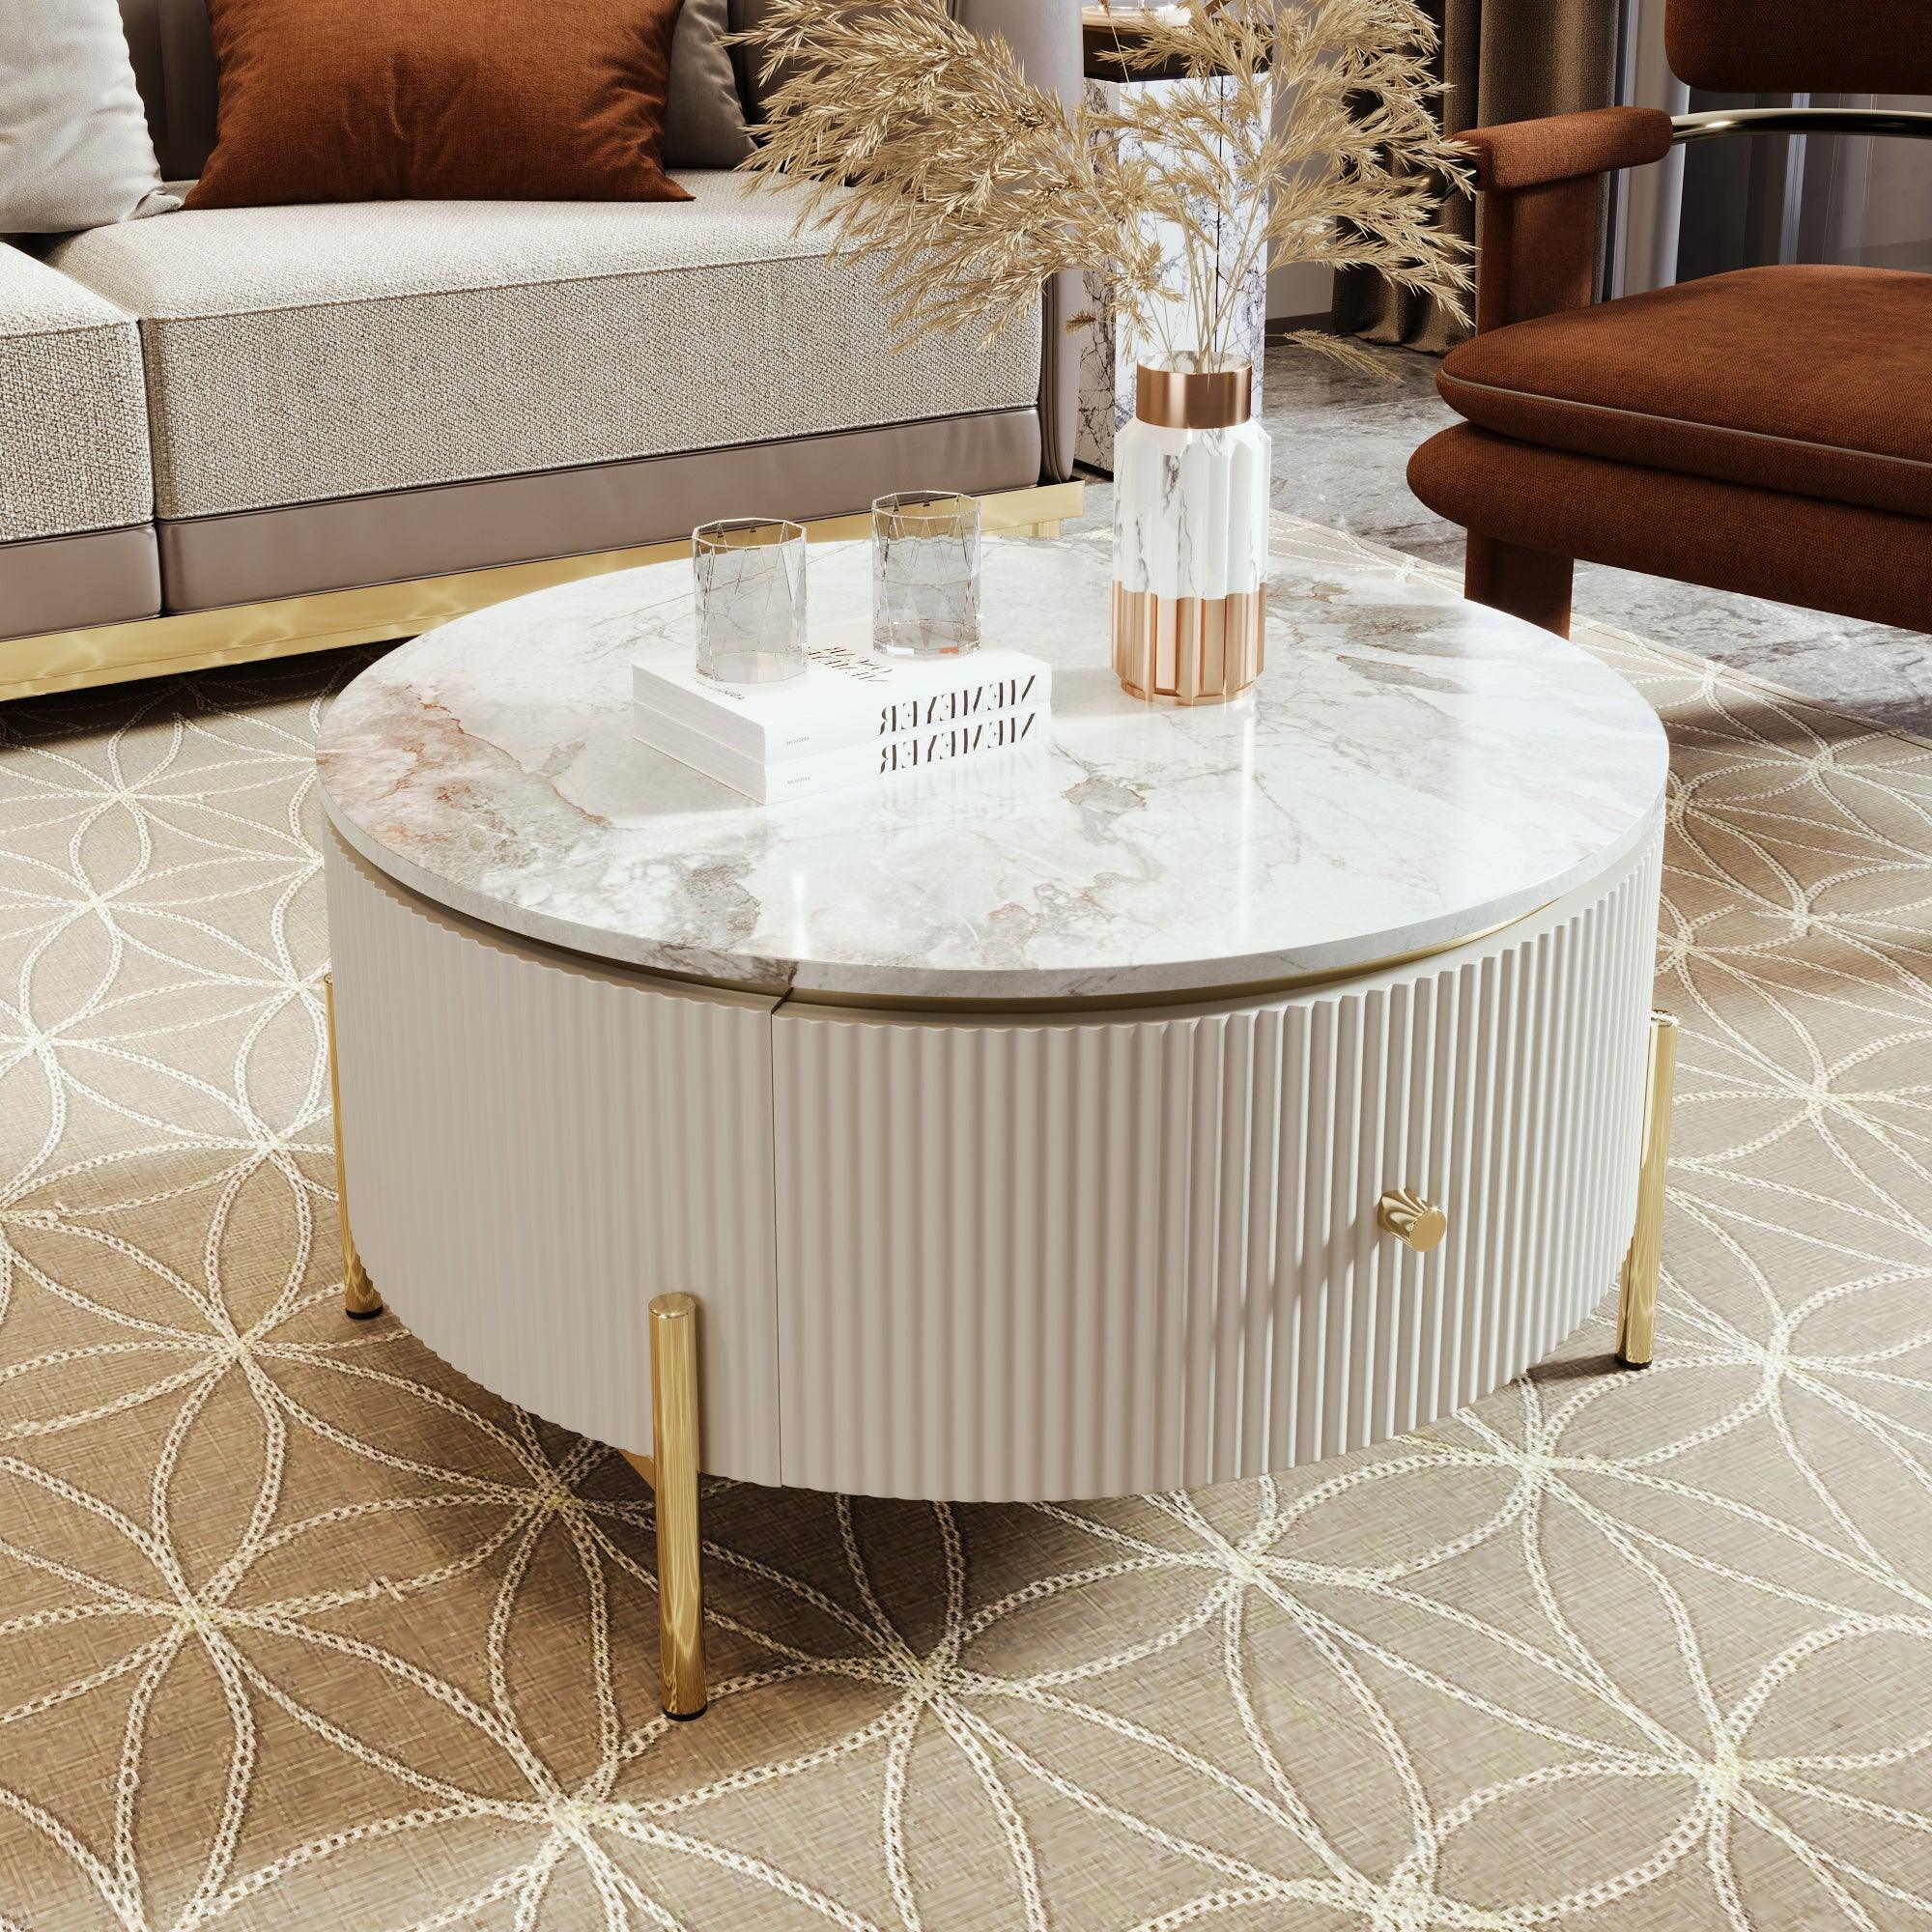 🆓🚛 Jamefer Modern Round Coffee Table With 2 Large Drawers - Off White